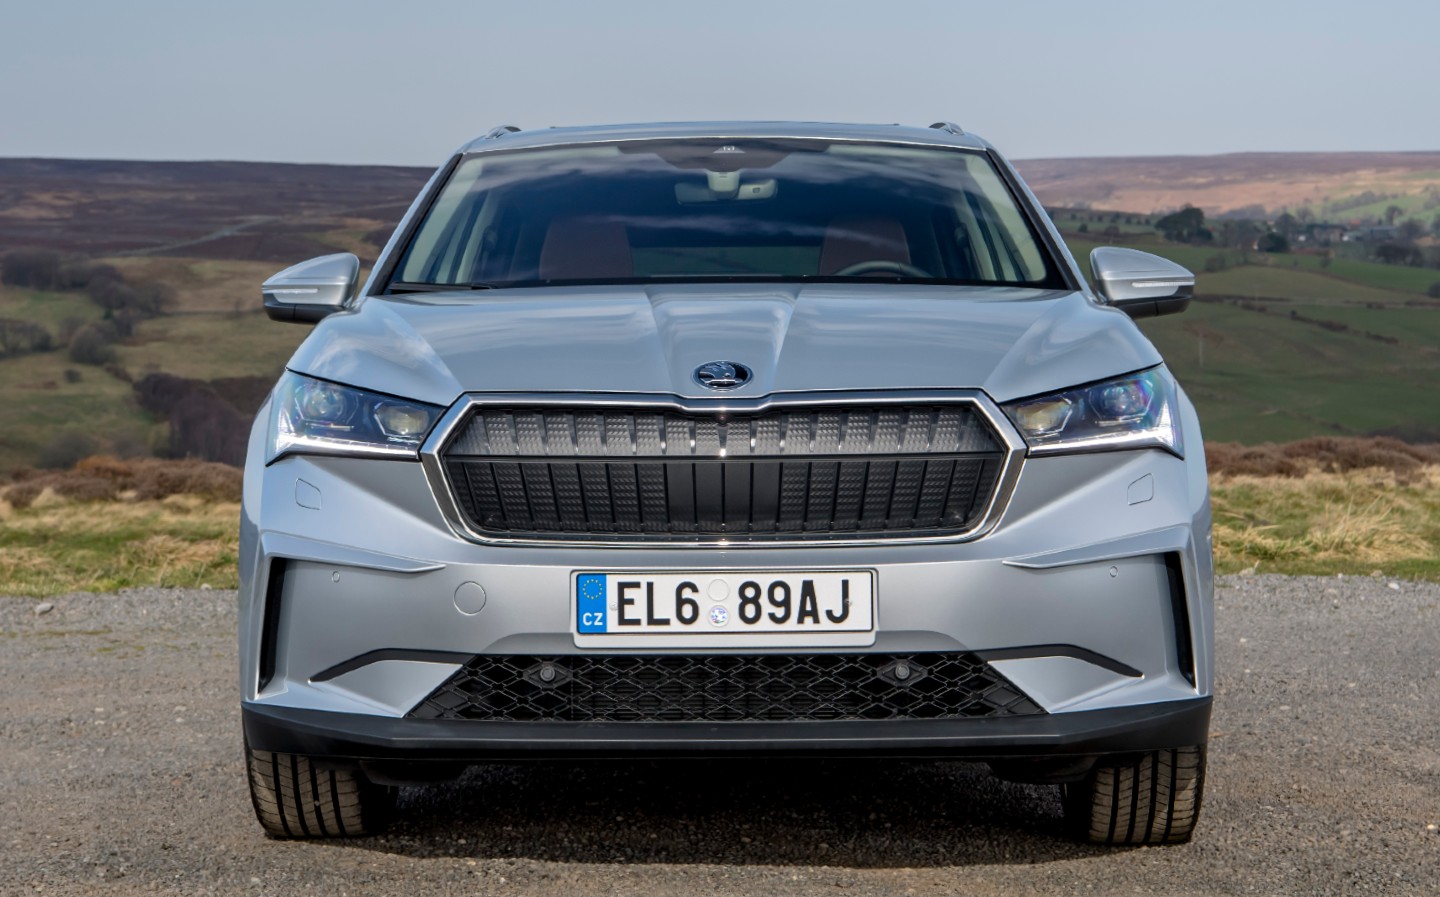 Skoda Enyaq iV 2021 review by Will Dron for Sunday Times Driving.co.uk